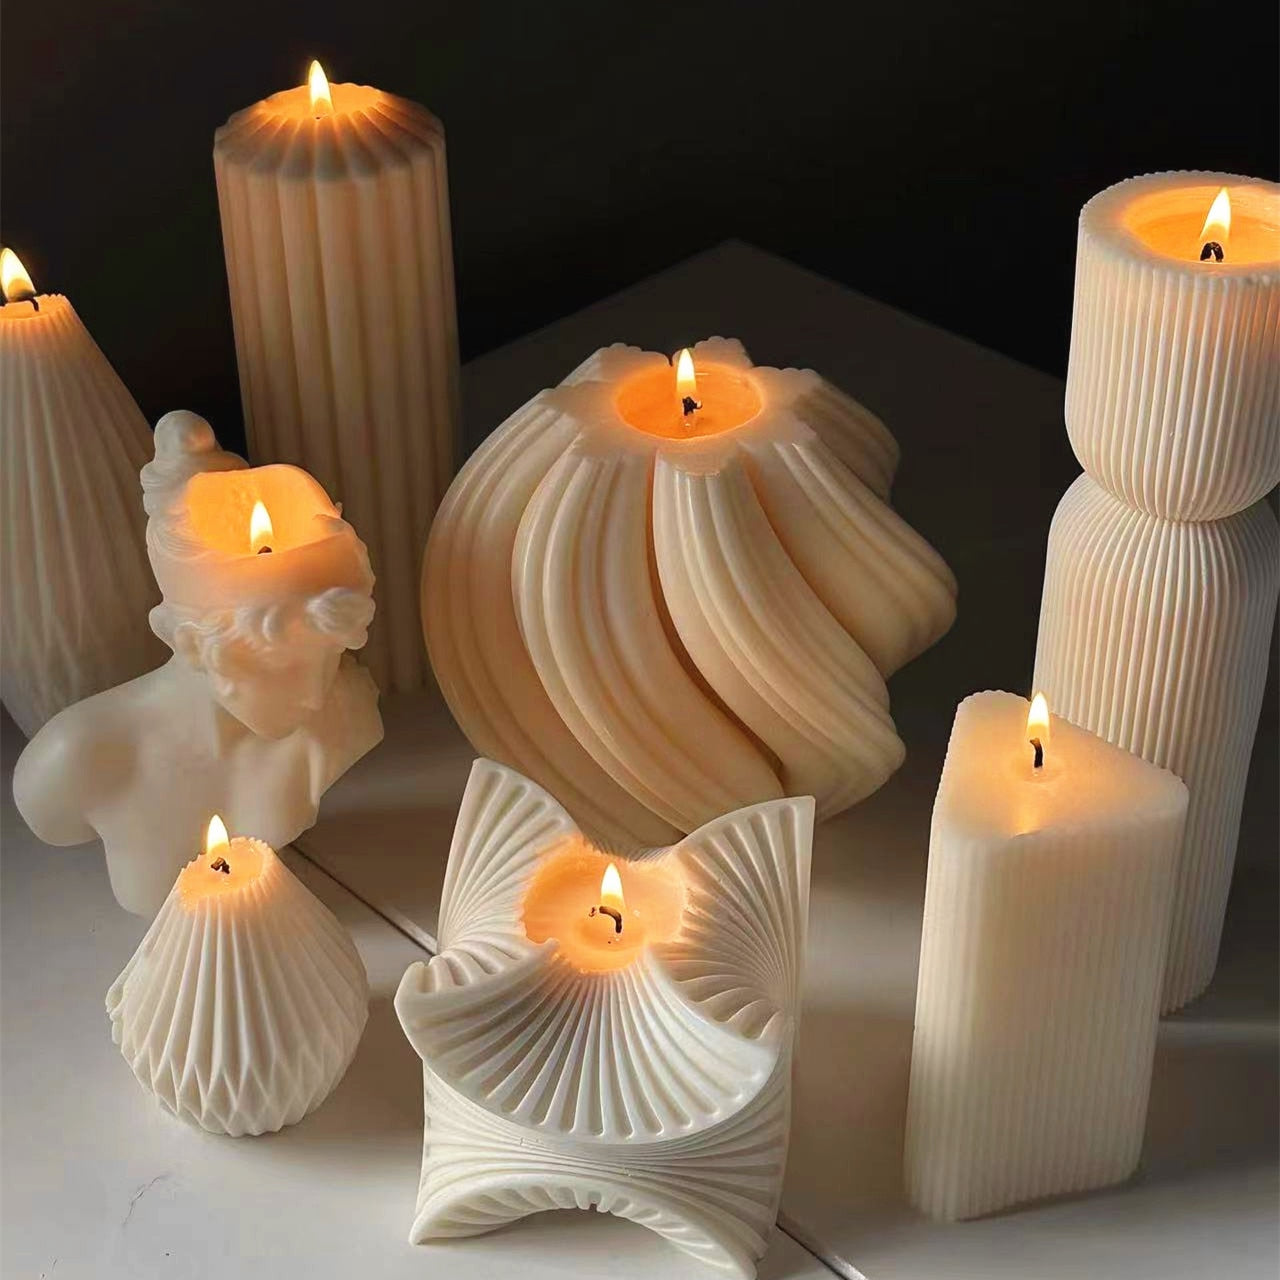 Pillar Swirl Candle Molds Wave Twirl Taper Spiral Silicone Mould Geometric Abstract Decorative Wavy Soy Wax Mold Acrylic mold